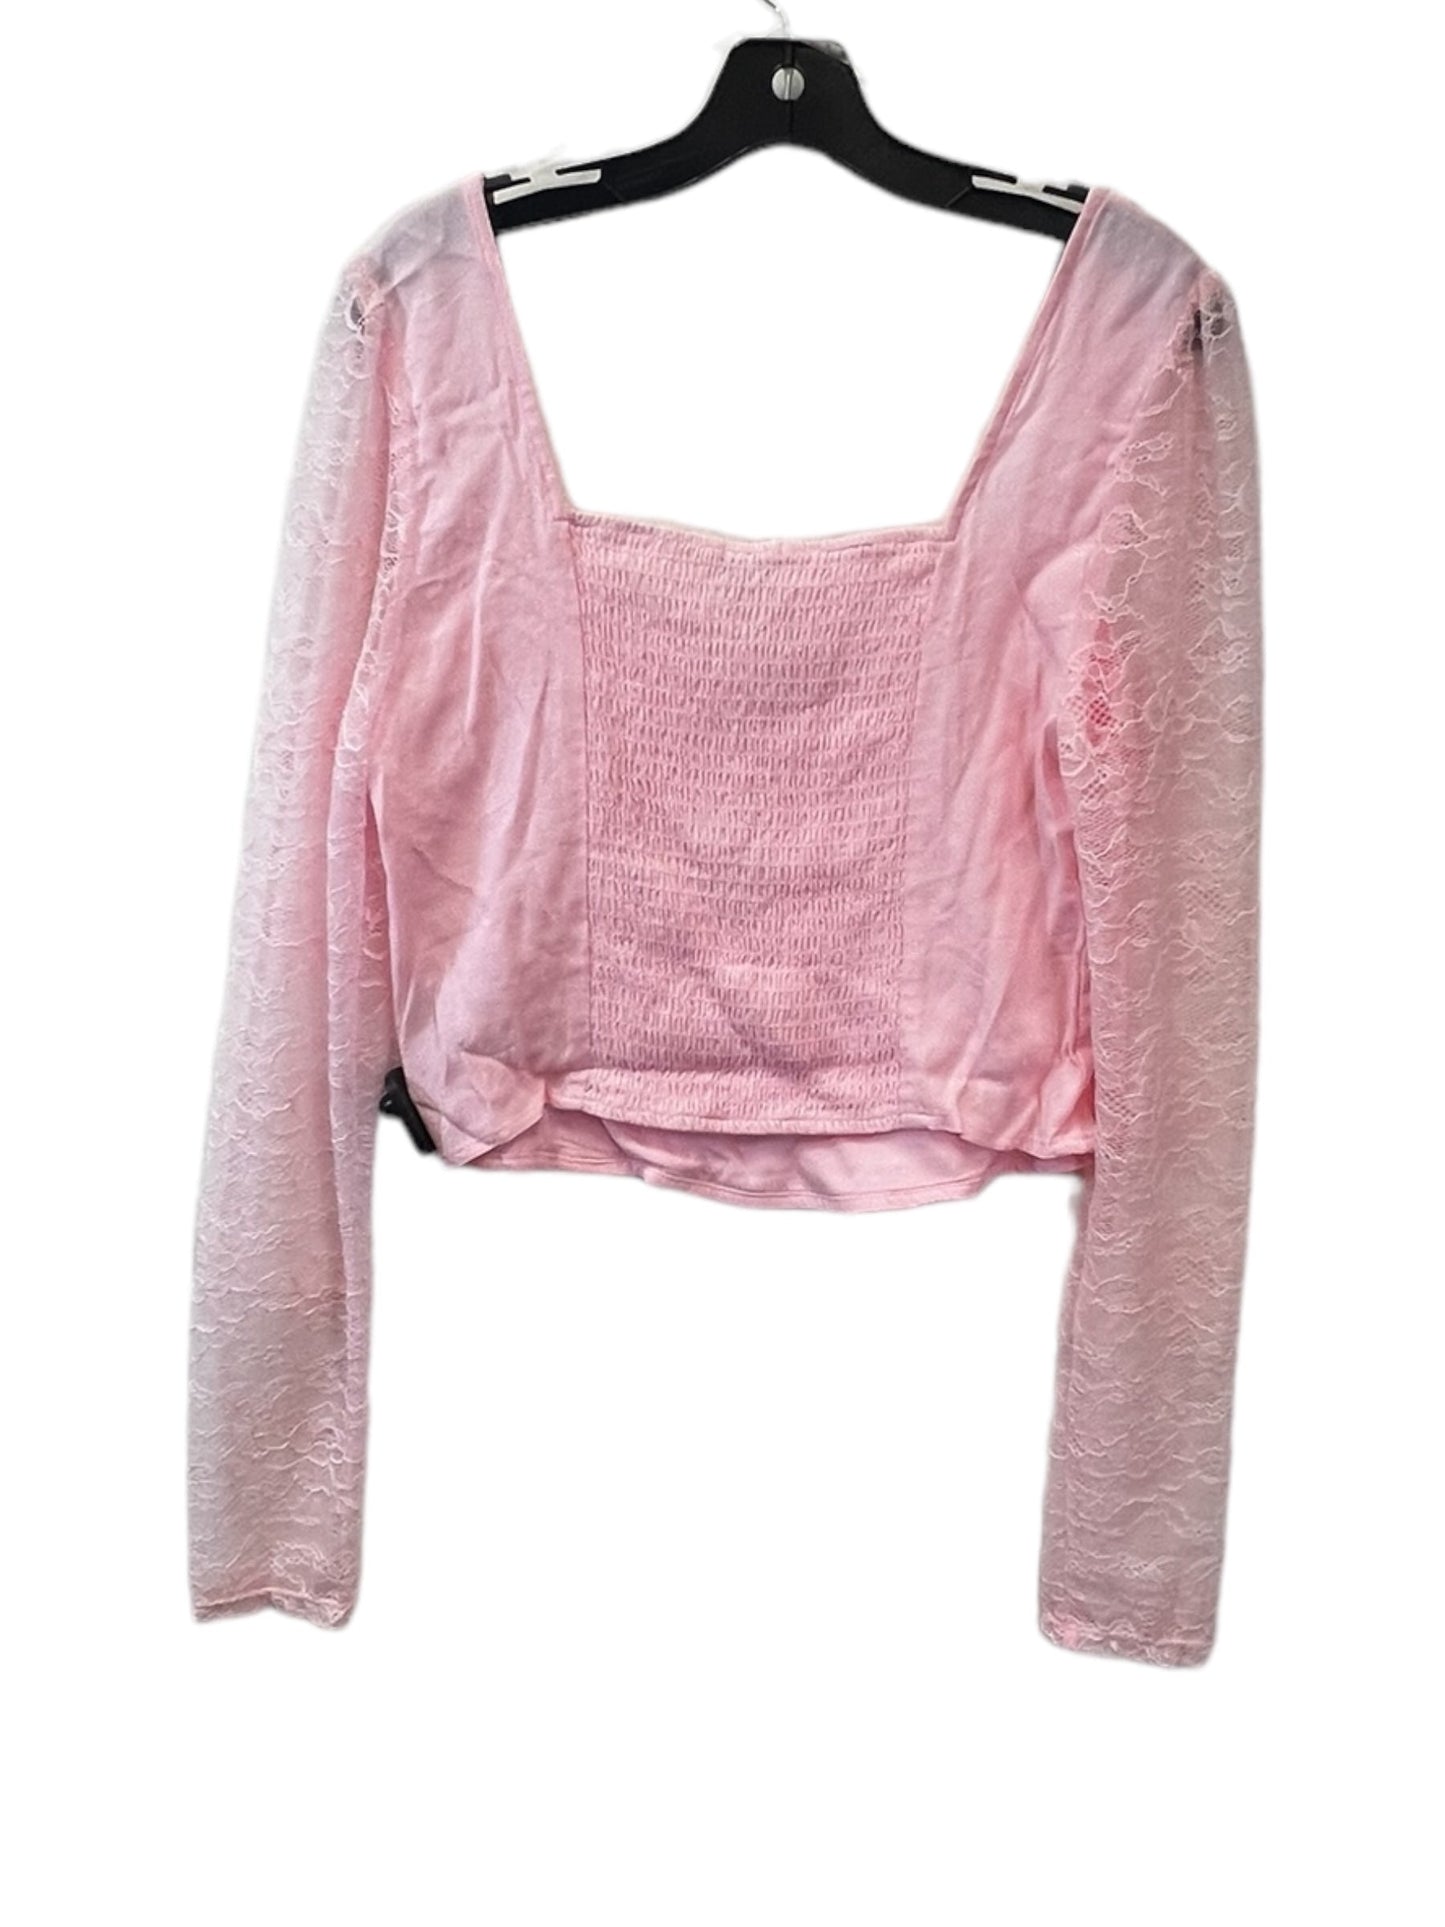 Pink Top Long Sleeve Wild Fable, Size S